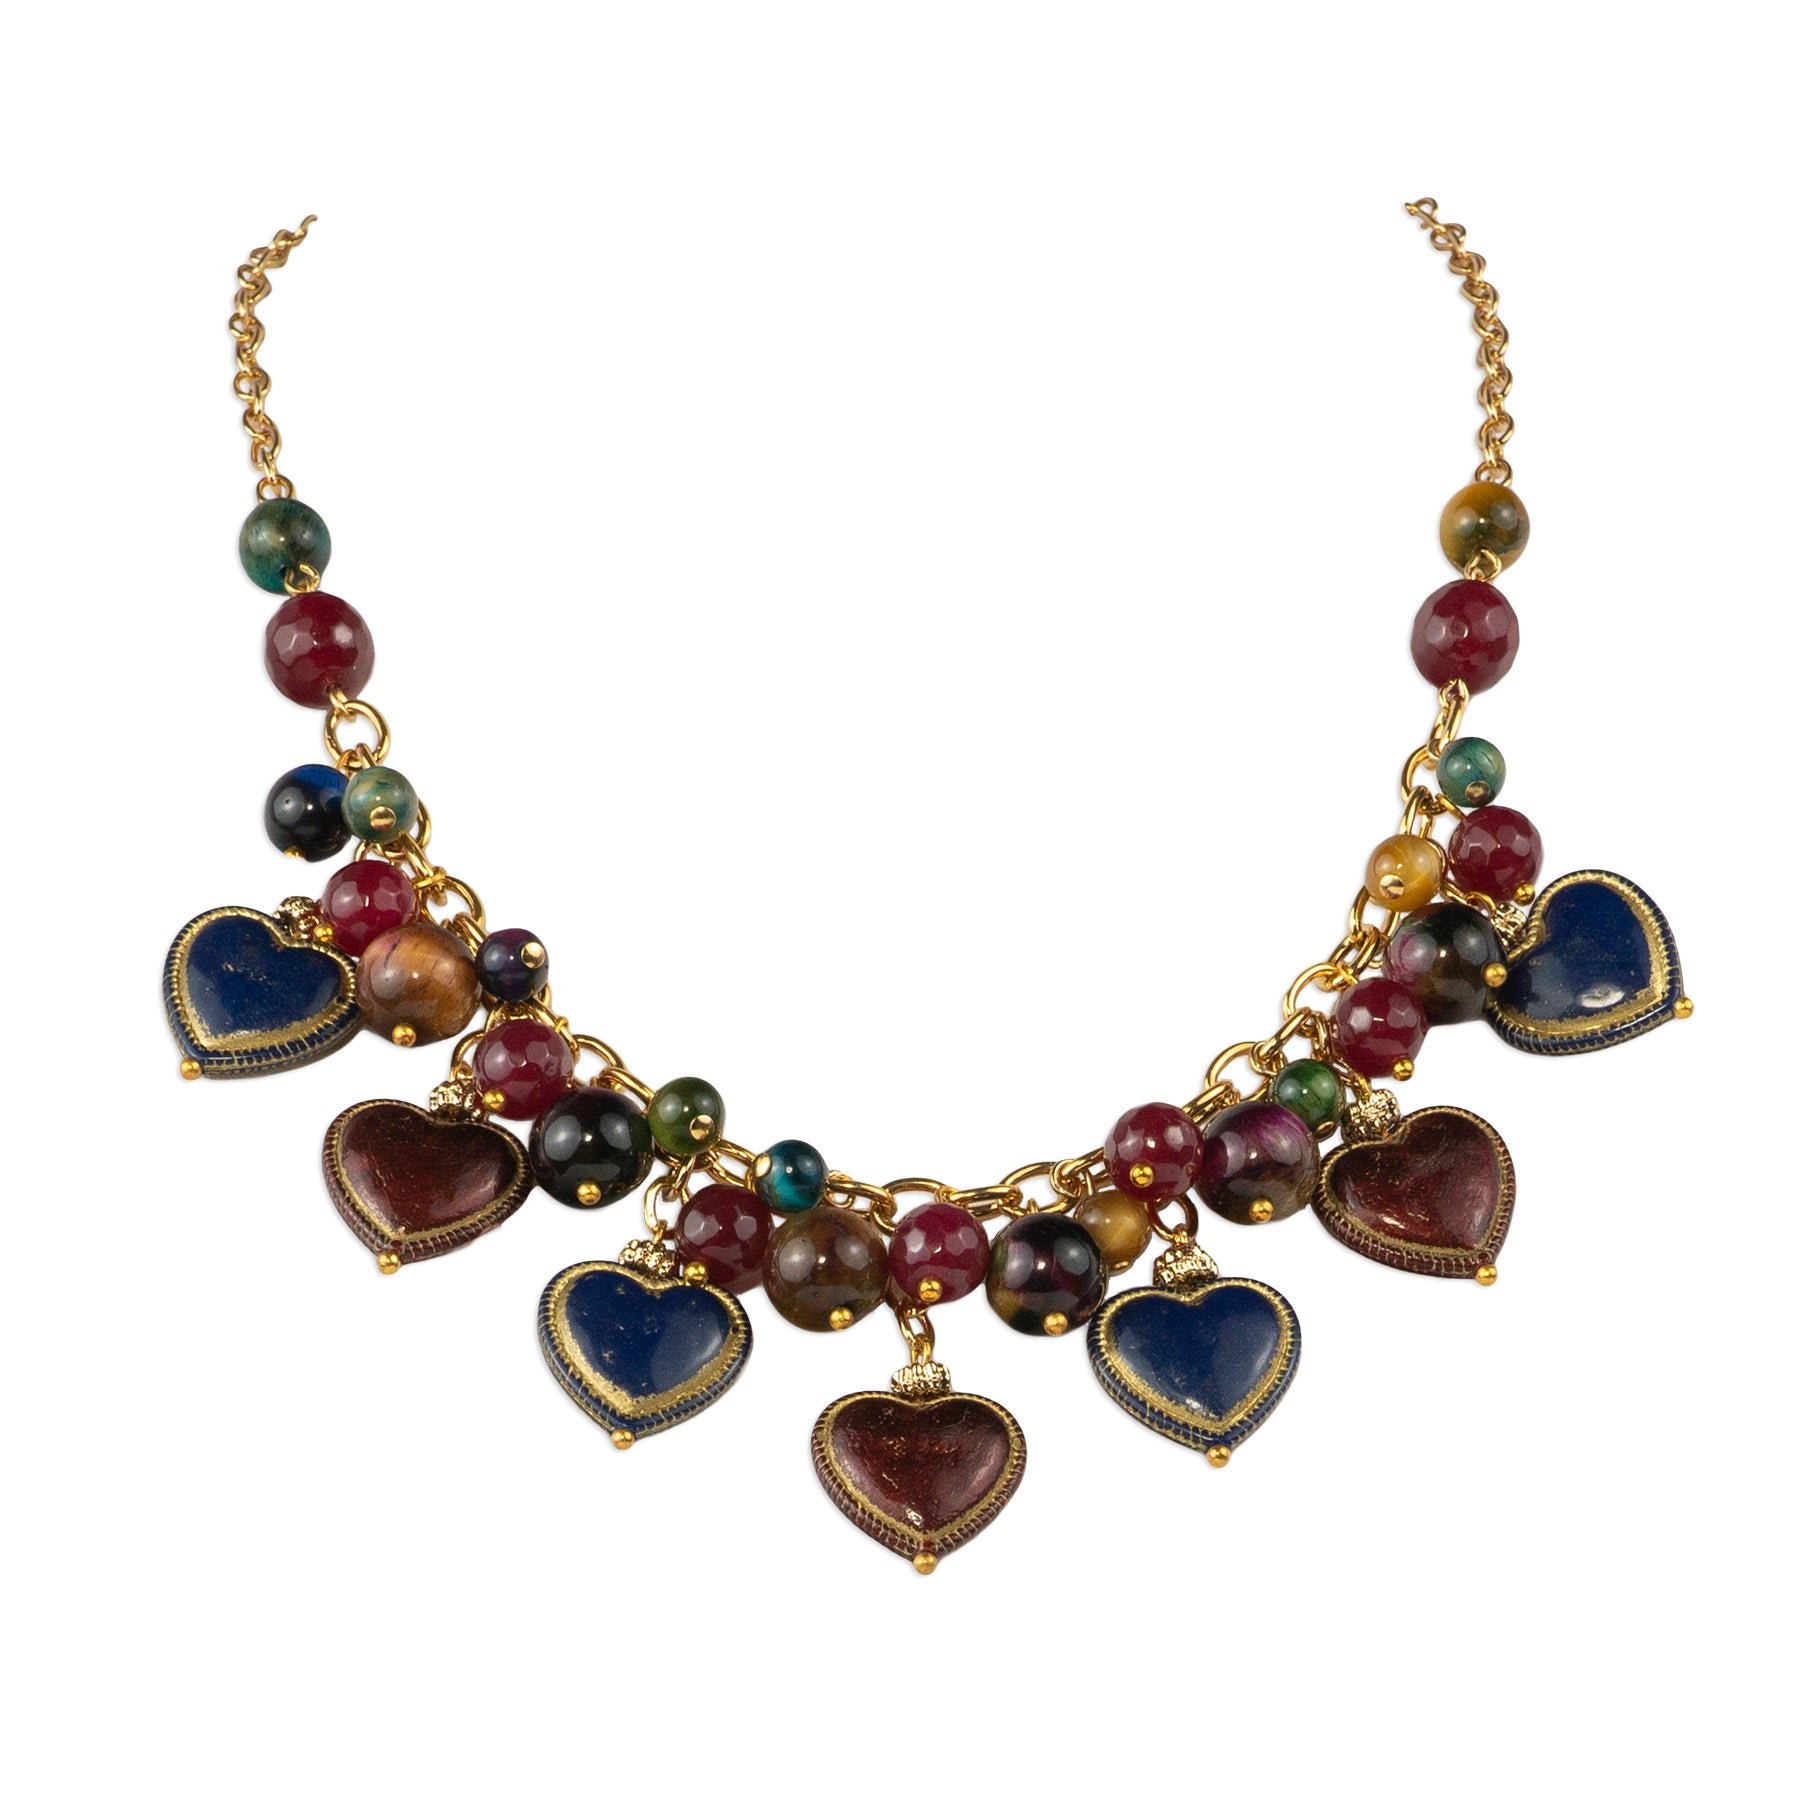 Charm choker necklace with semi-precious stones and hearts